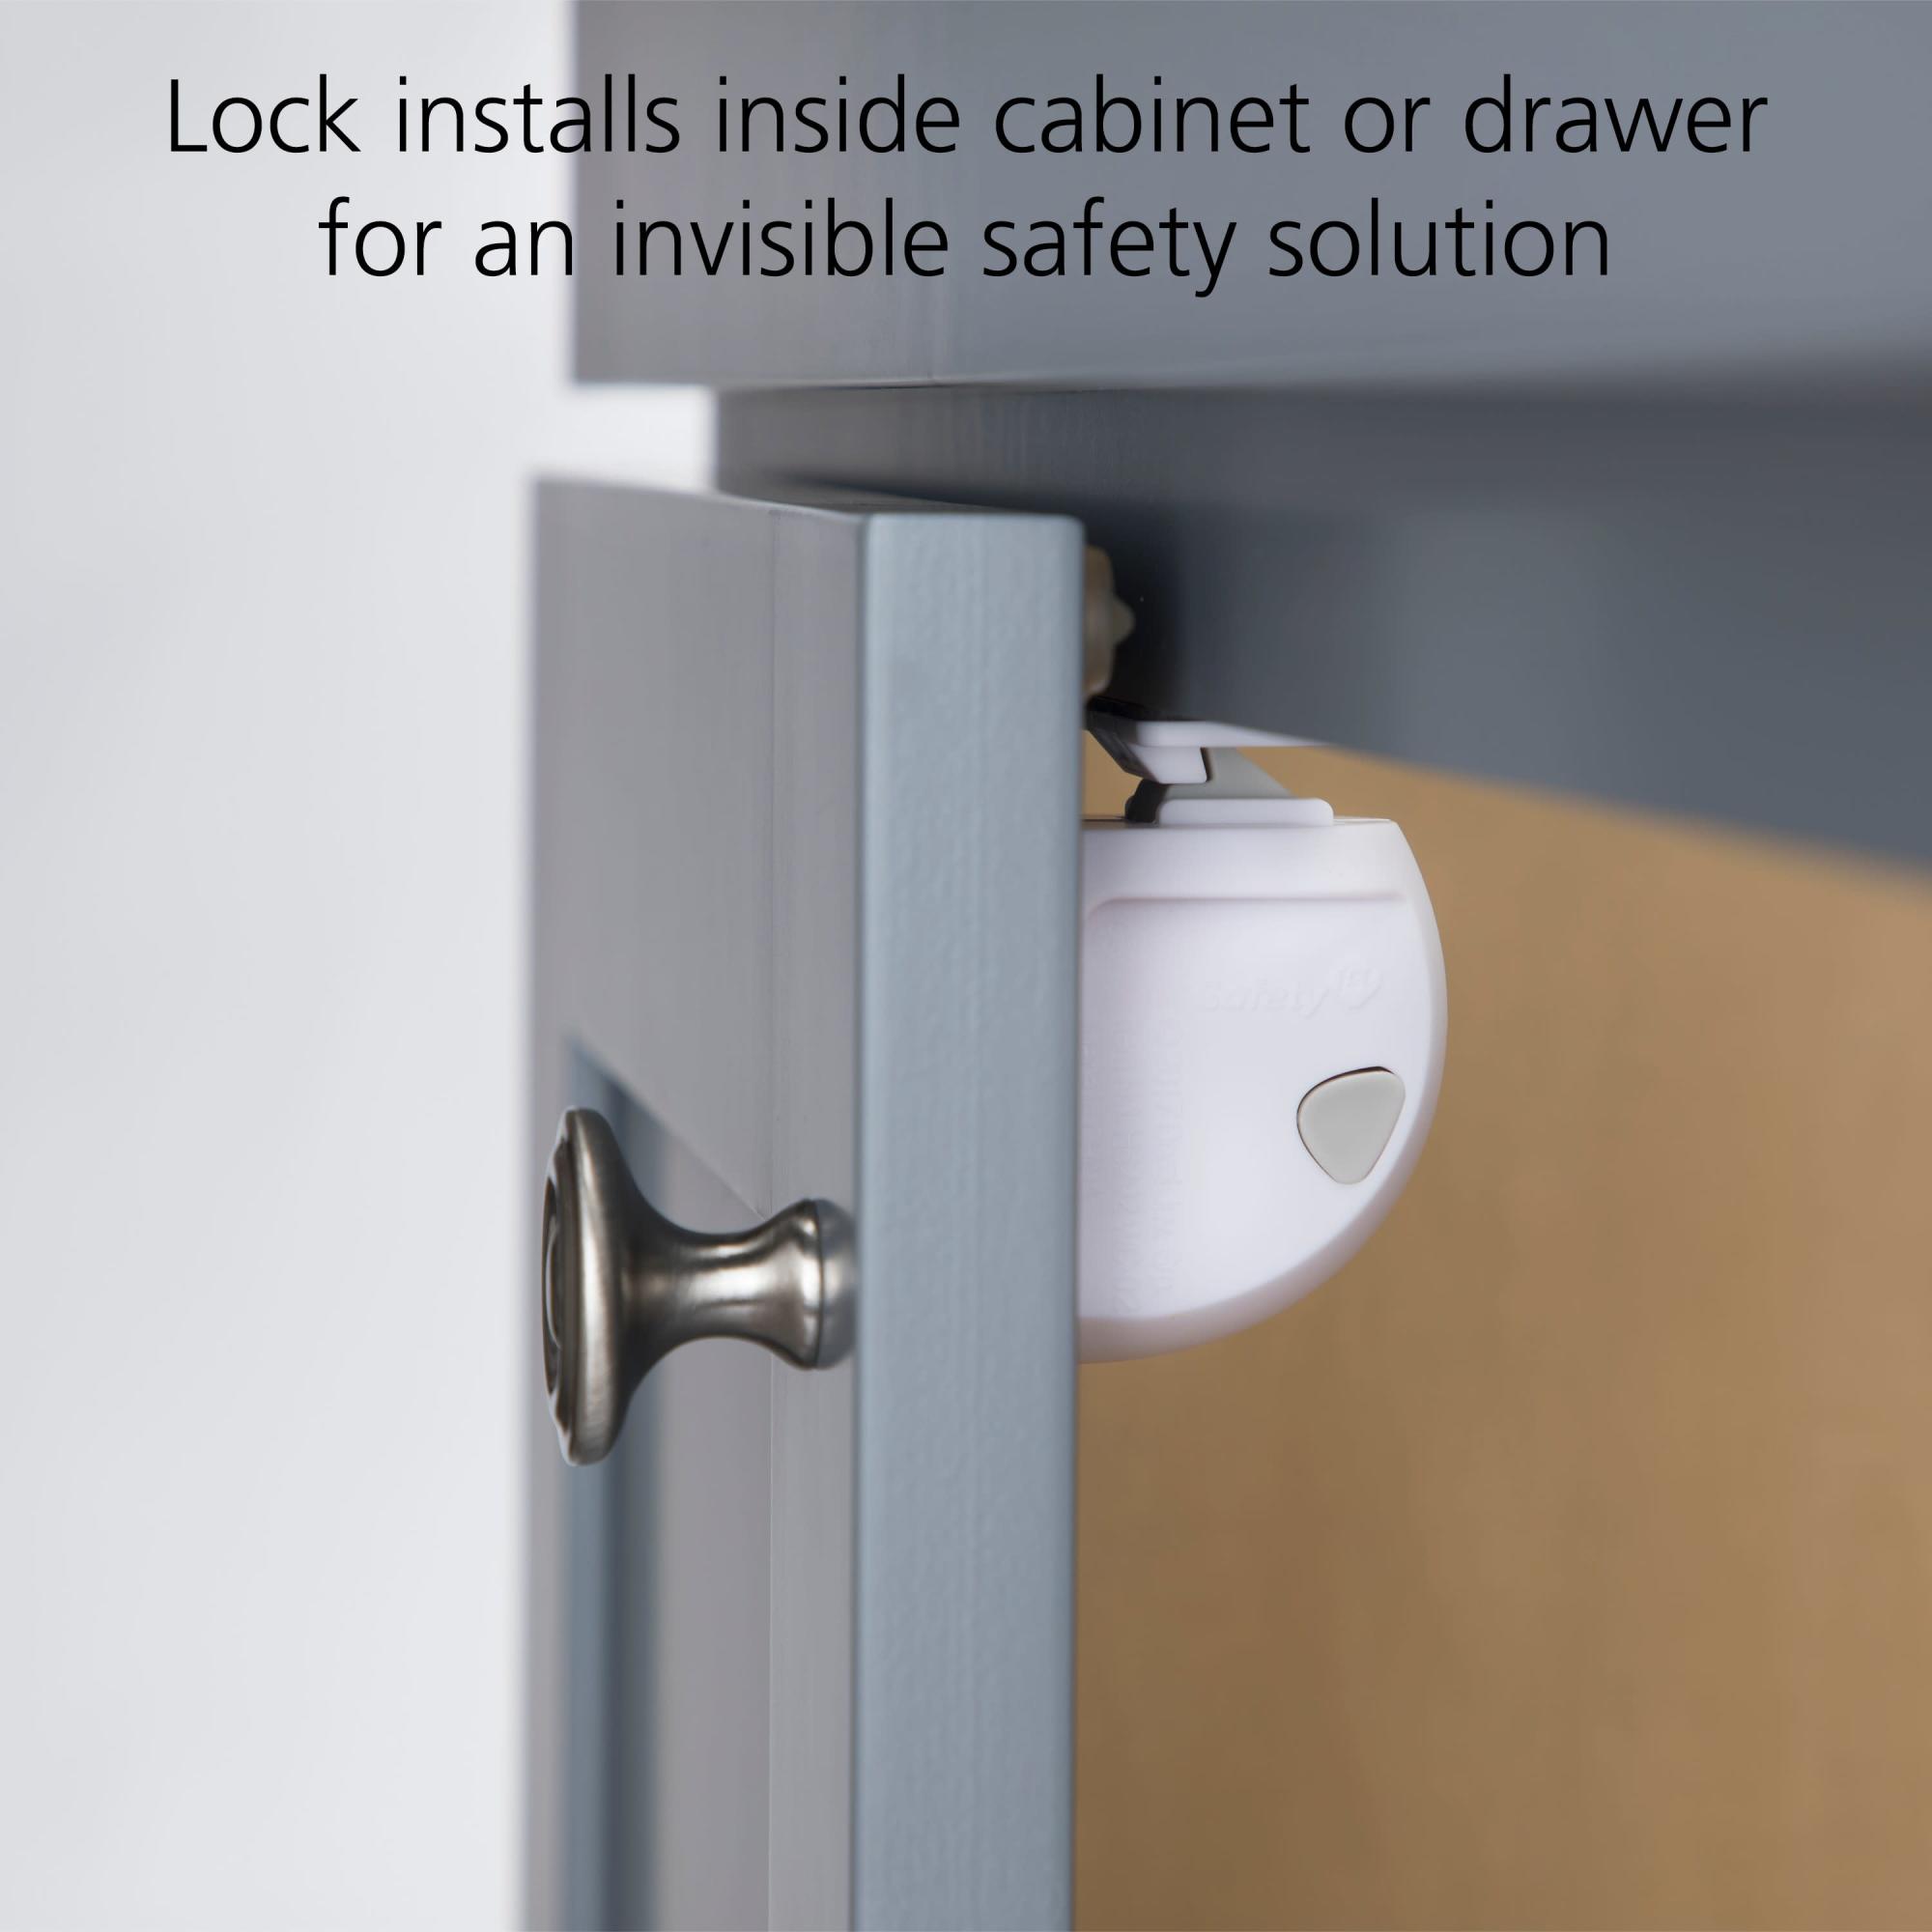 Lock shown on the inside of a cabinet door